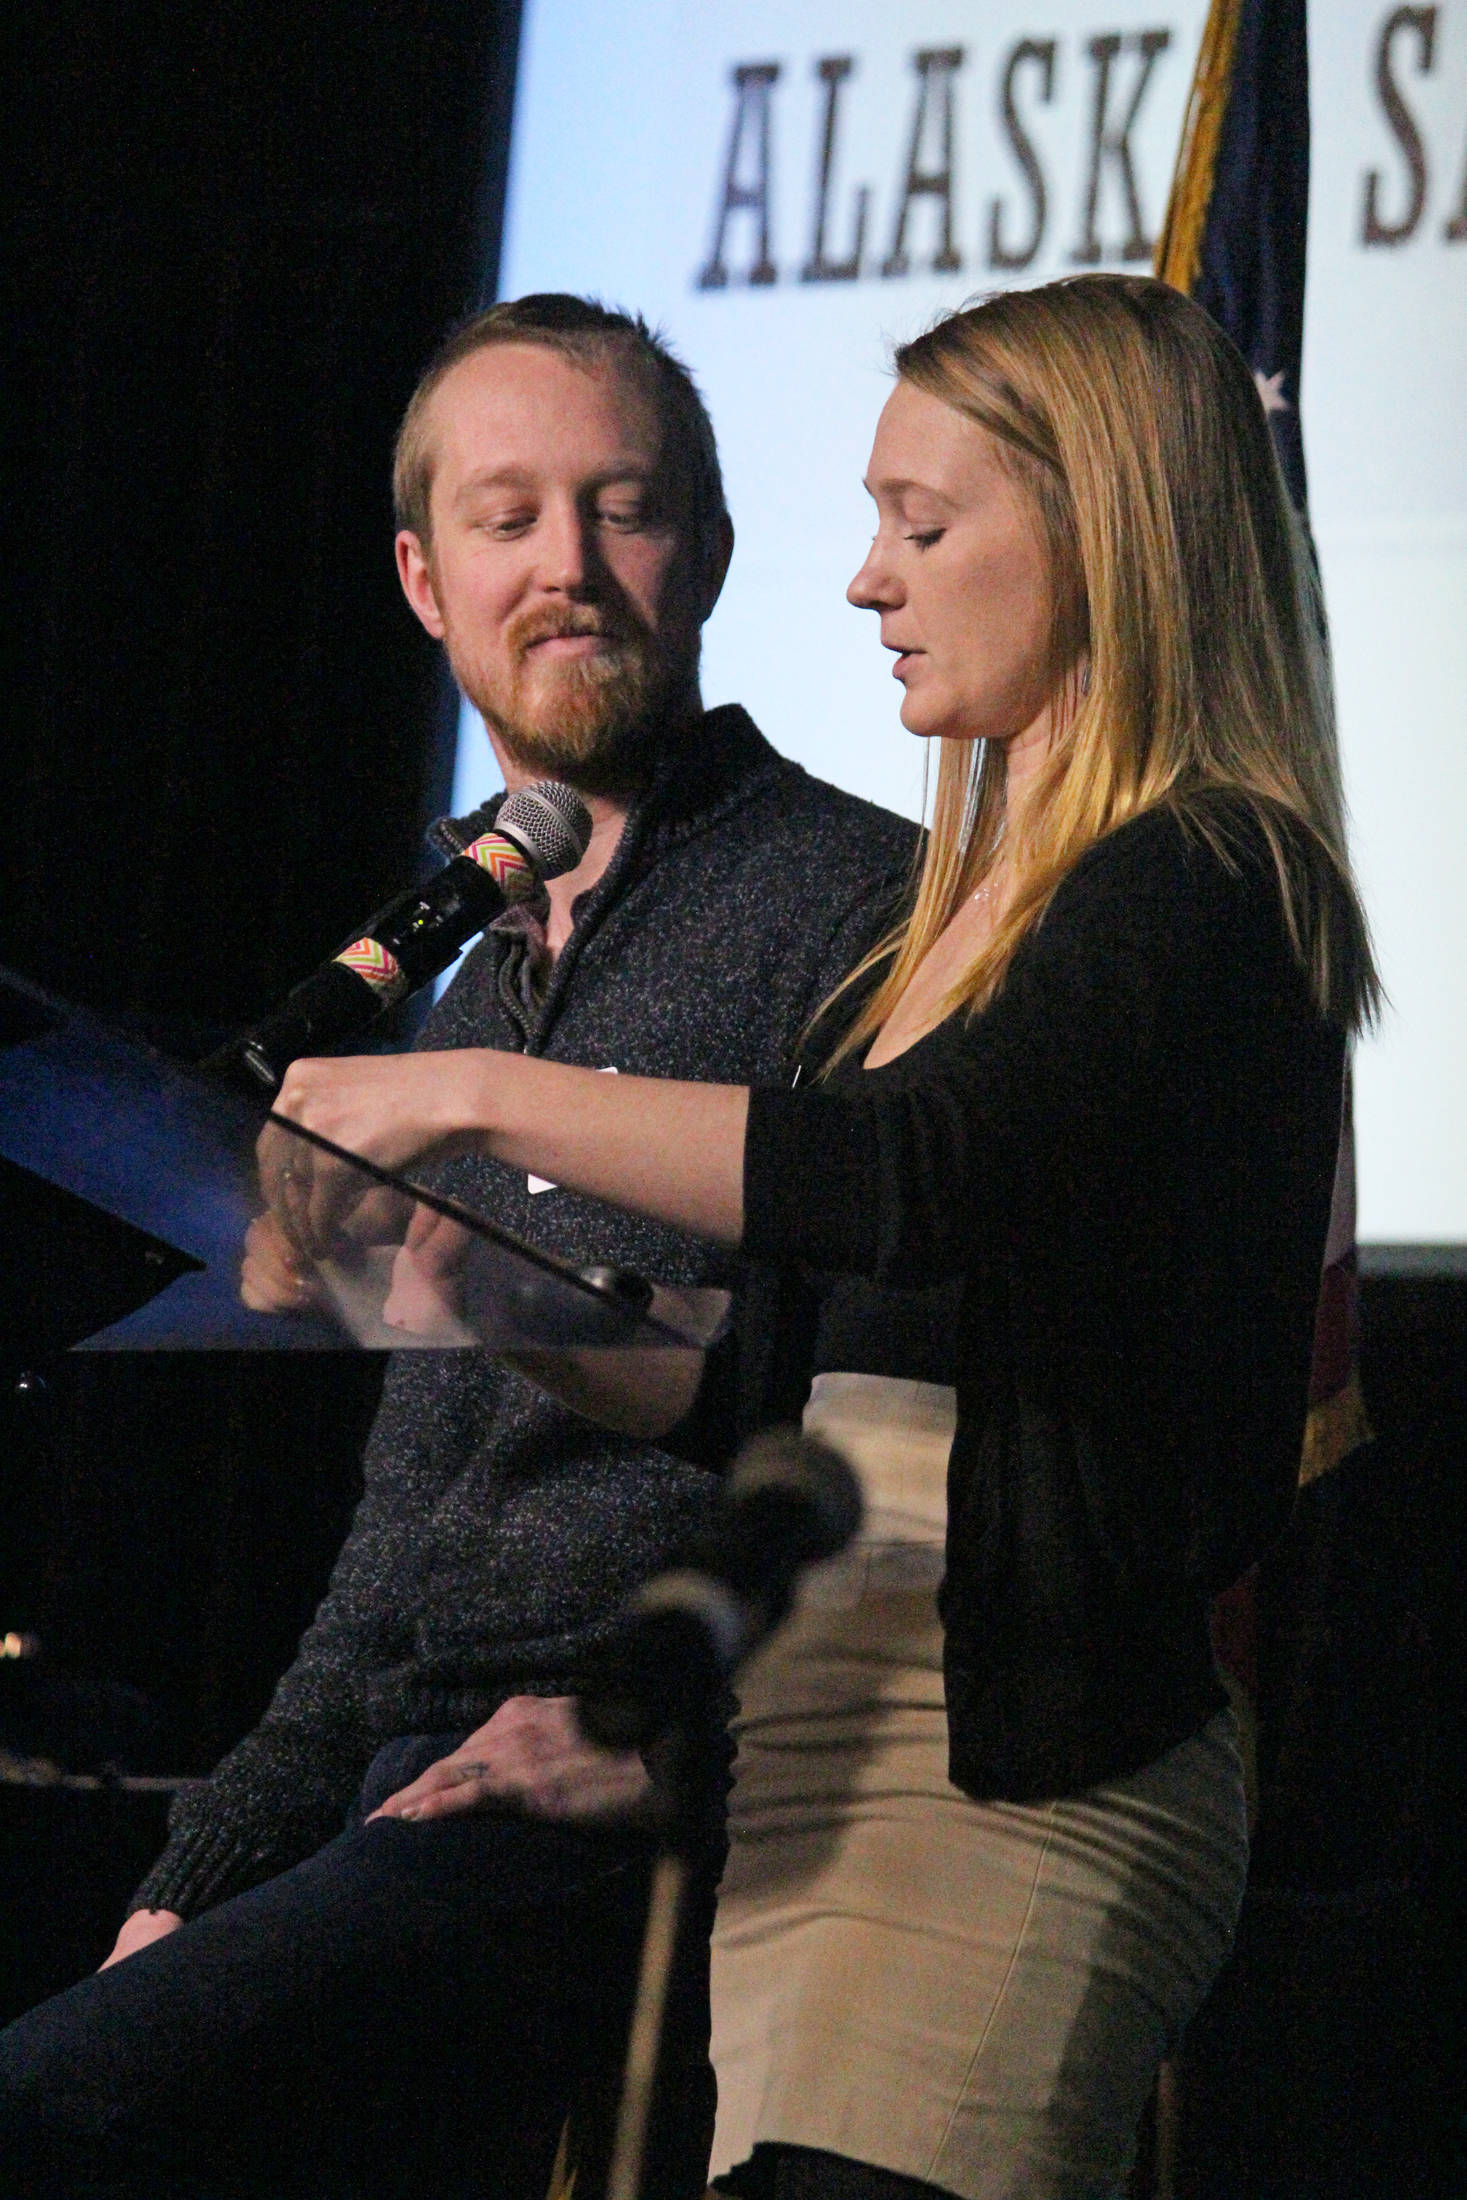 Casey (left) and Britni (right) Siekaniec, owners and operators of Alaska Salt Co., tell the story of their business during the annual Industry Outlook Forum on Wednesday, in Homer. (Photo by Megan Pacer/Homer News)